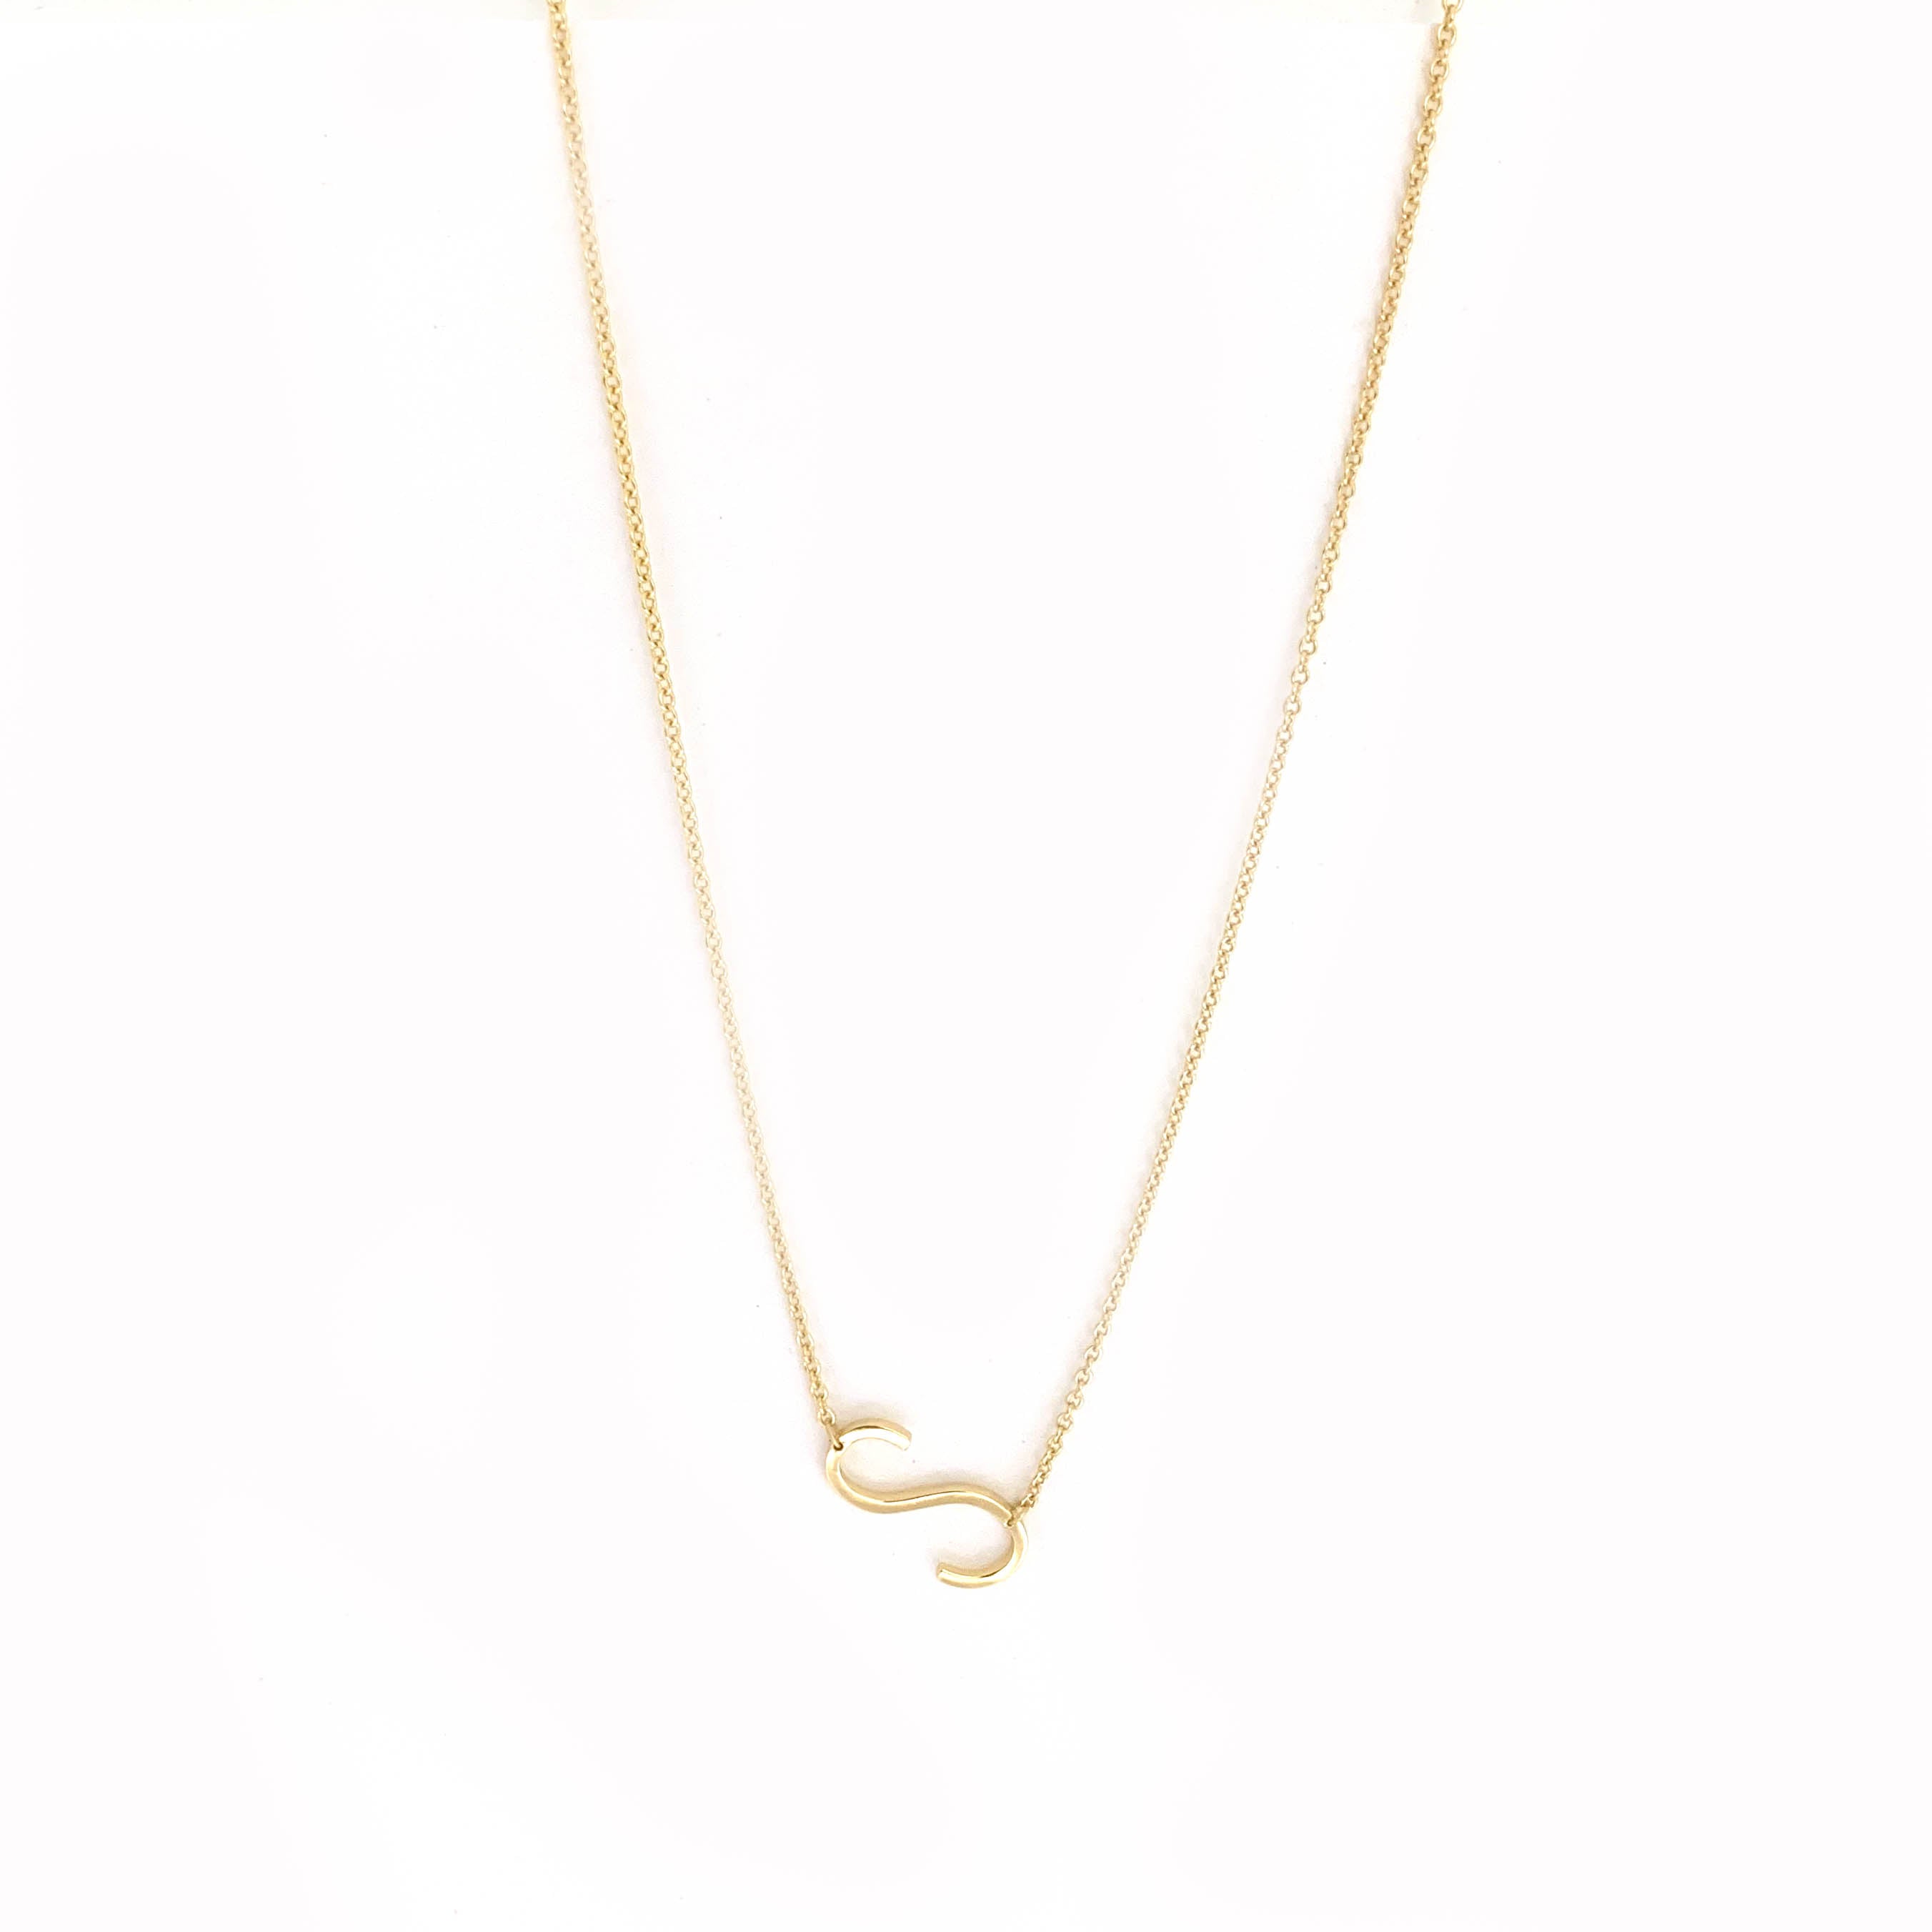 sterling/gold fill small initial necklace